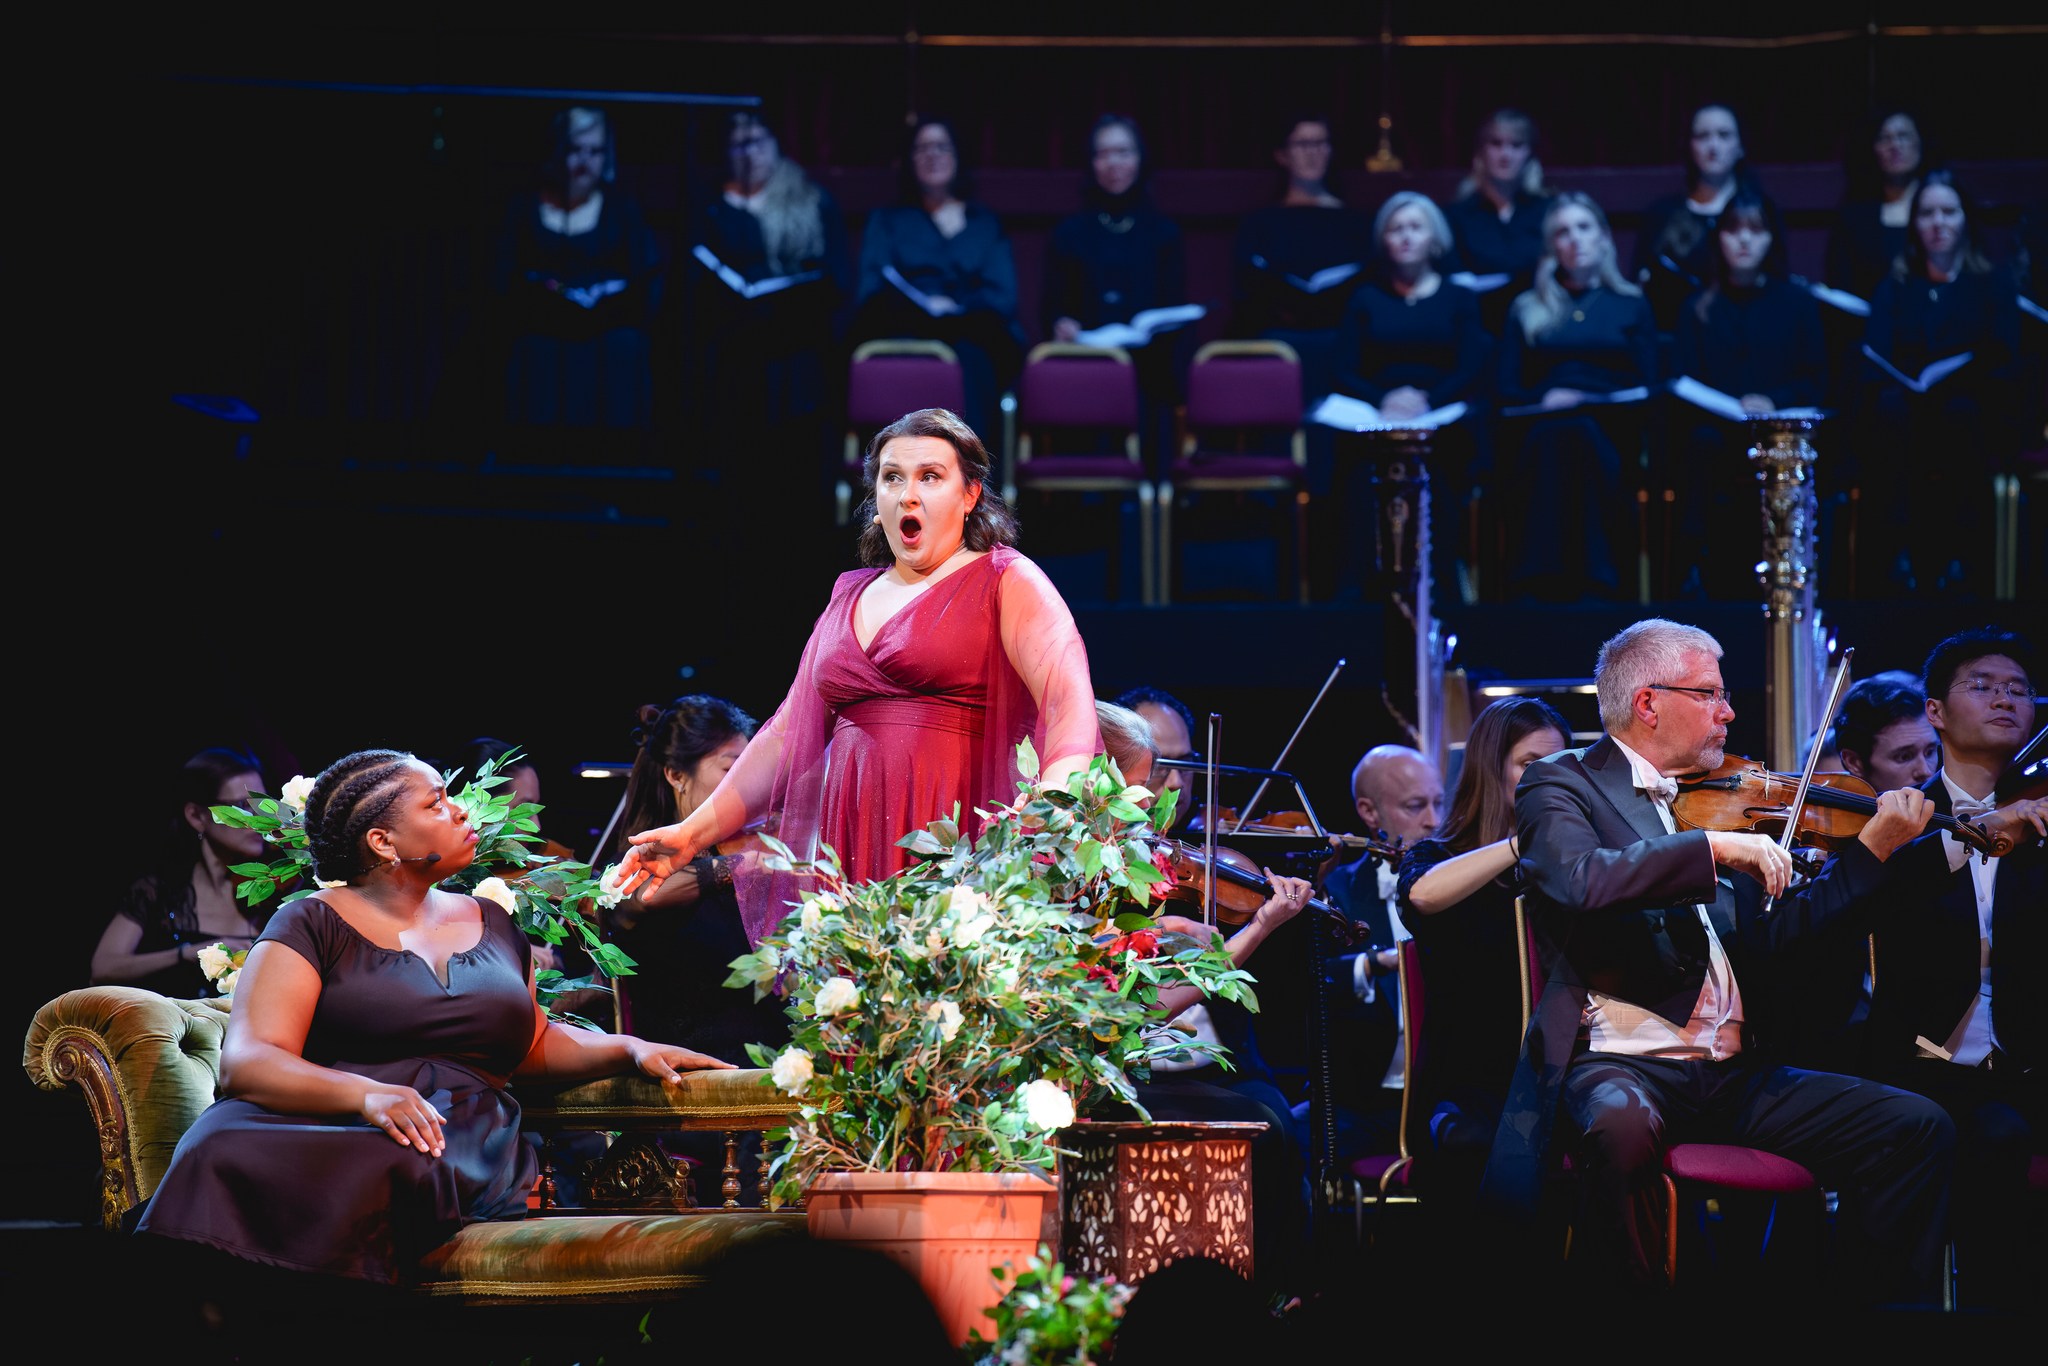 Maria Motolygina singing as Iolanta in a red dress on stage at the Royal Albert Hall